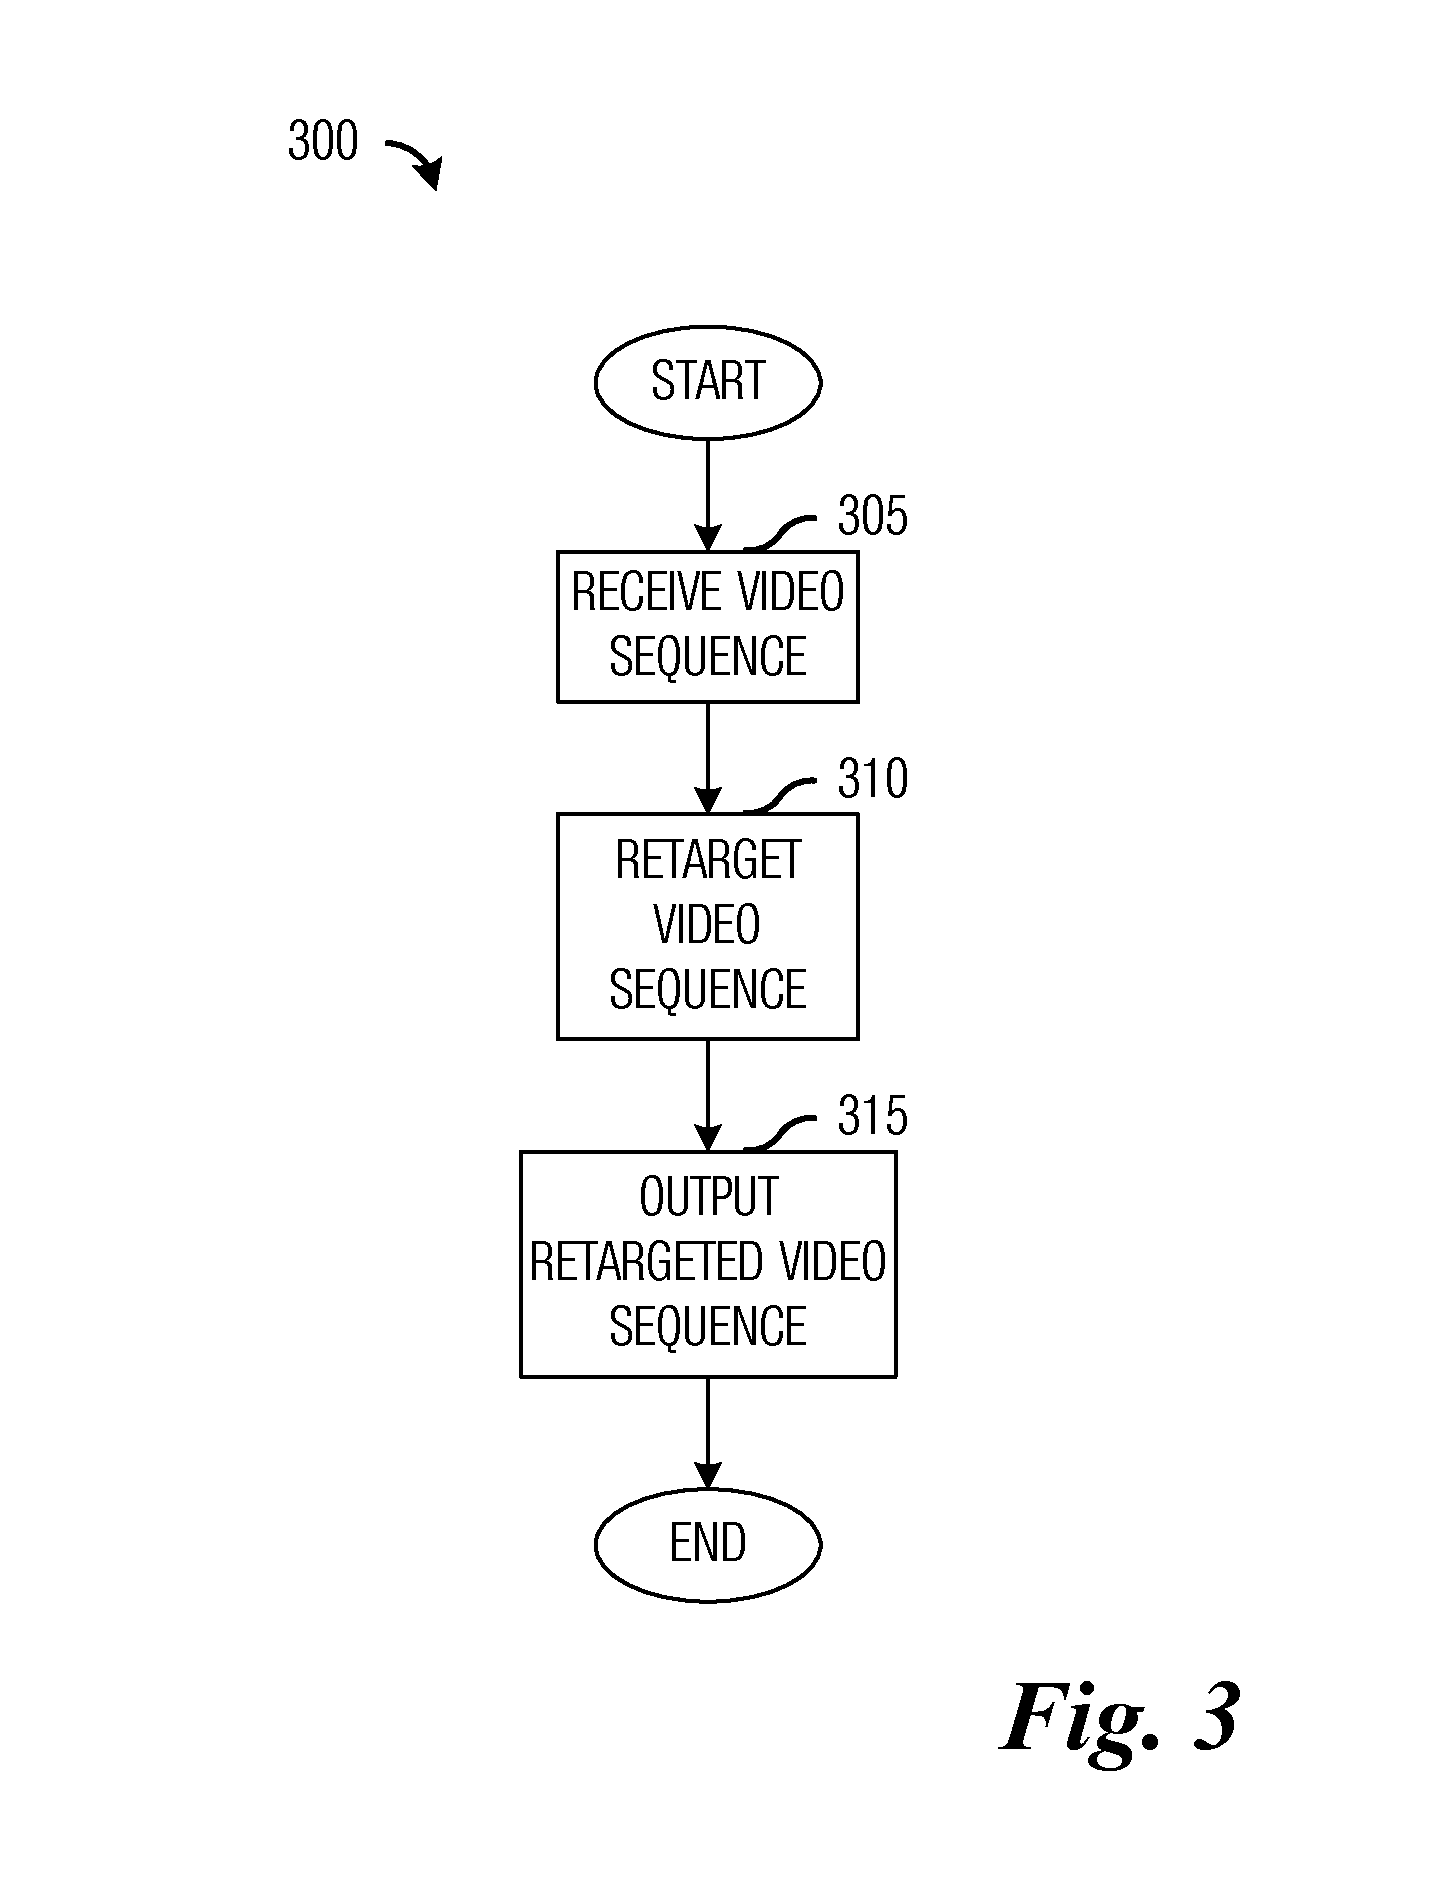 System and Method for Retargeting Video Sequences